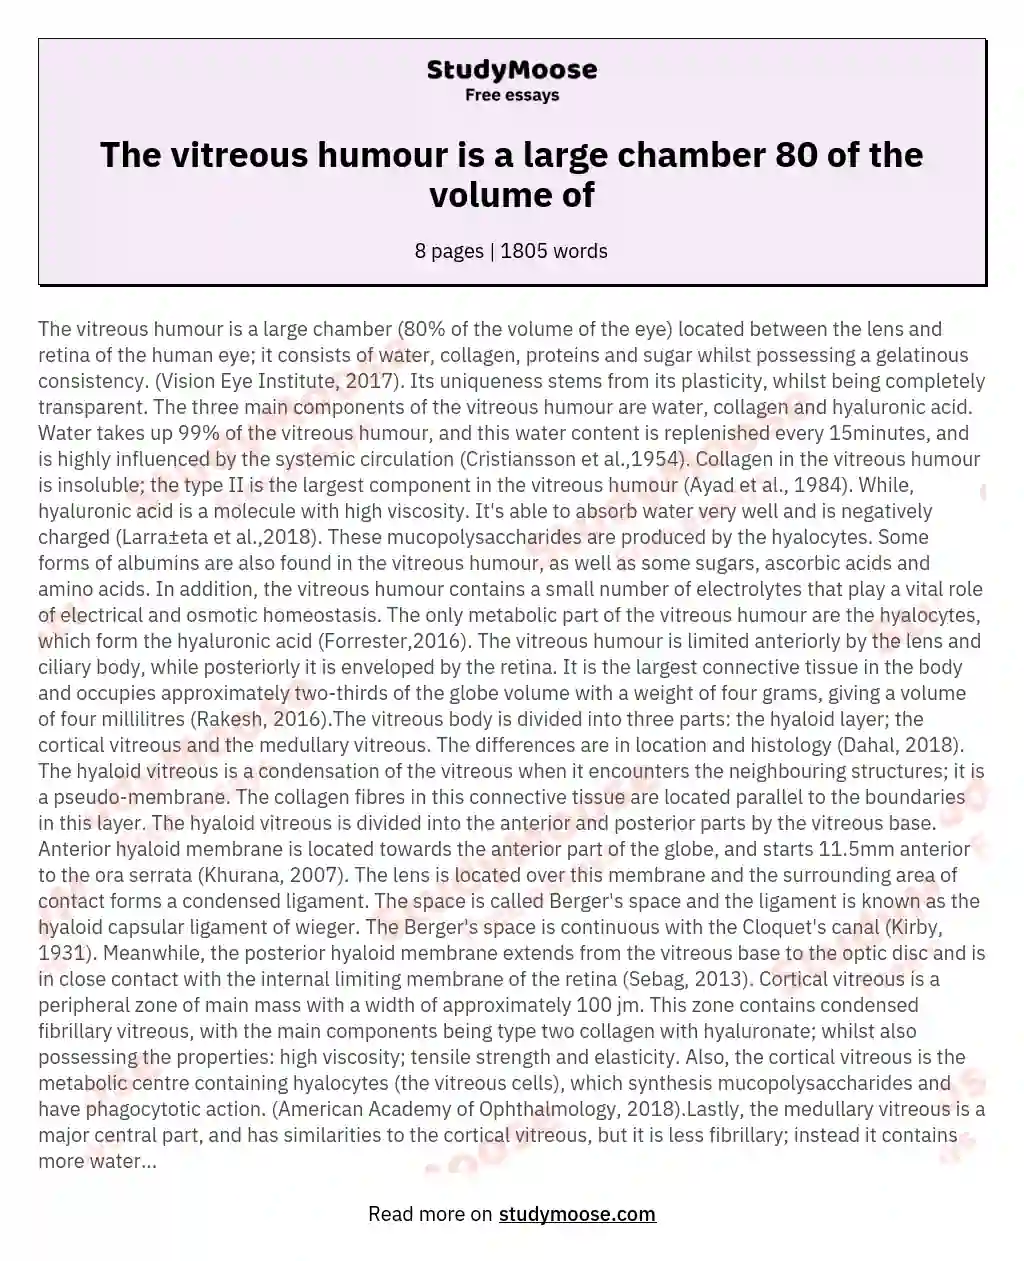 The vitreous humour is a large chamber 80 of the volume of essay